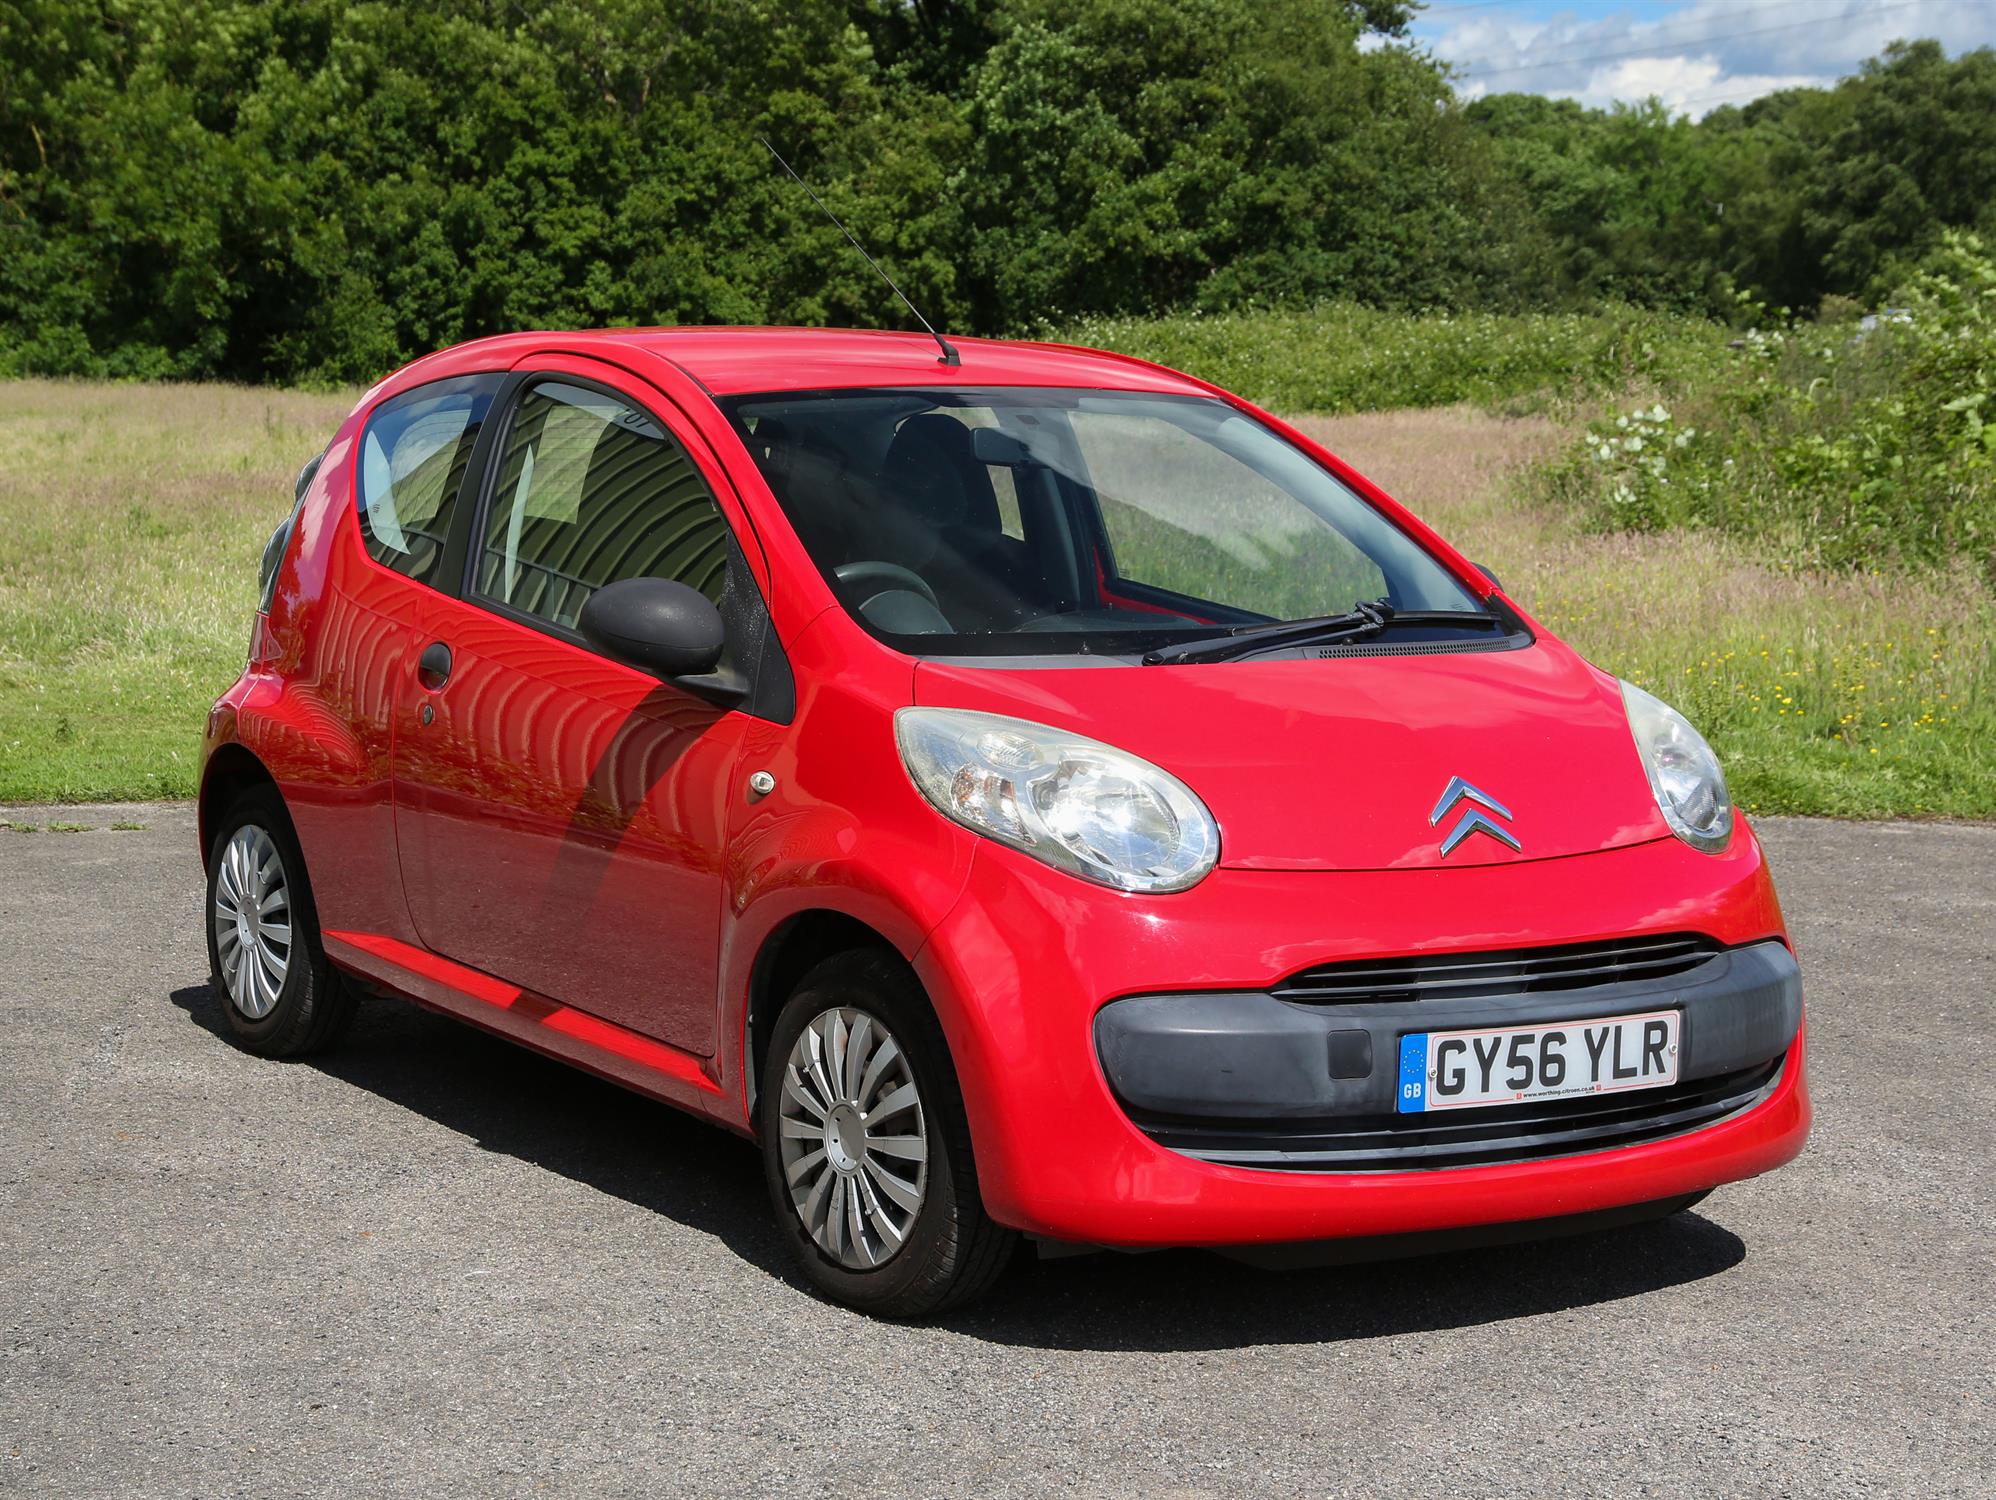 Citroen C1, 5 speed manual. Registration number GY56 YLR. Well looked after being a one owner car.